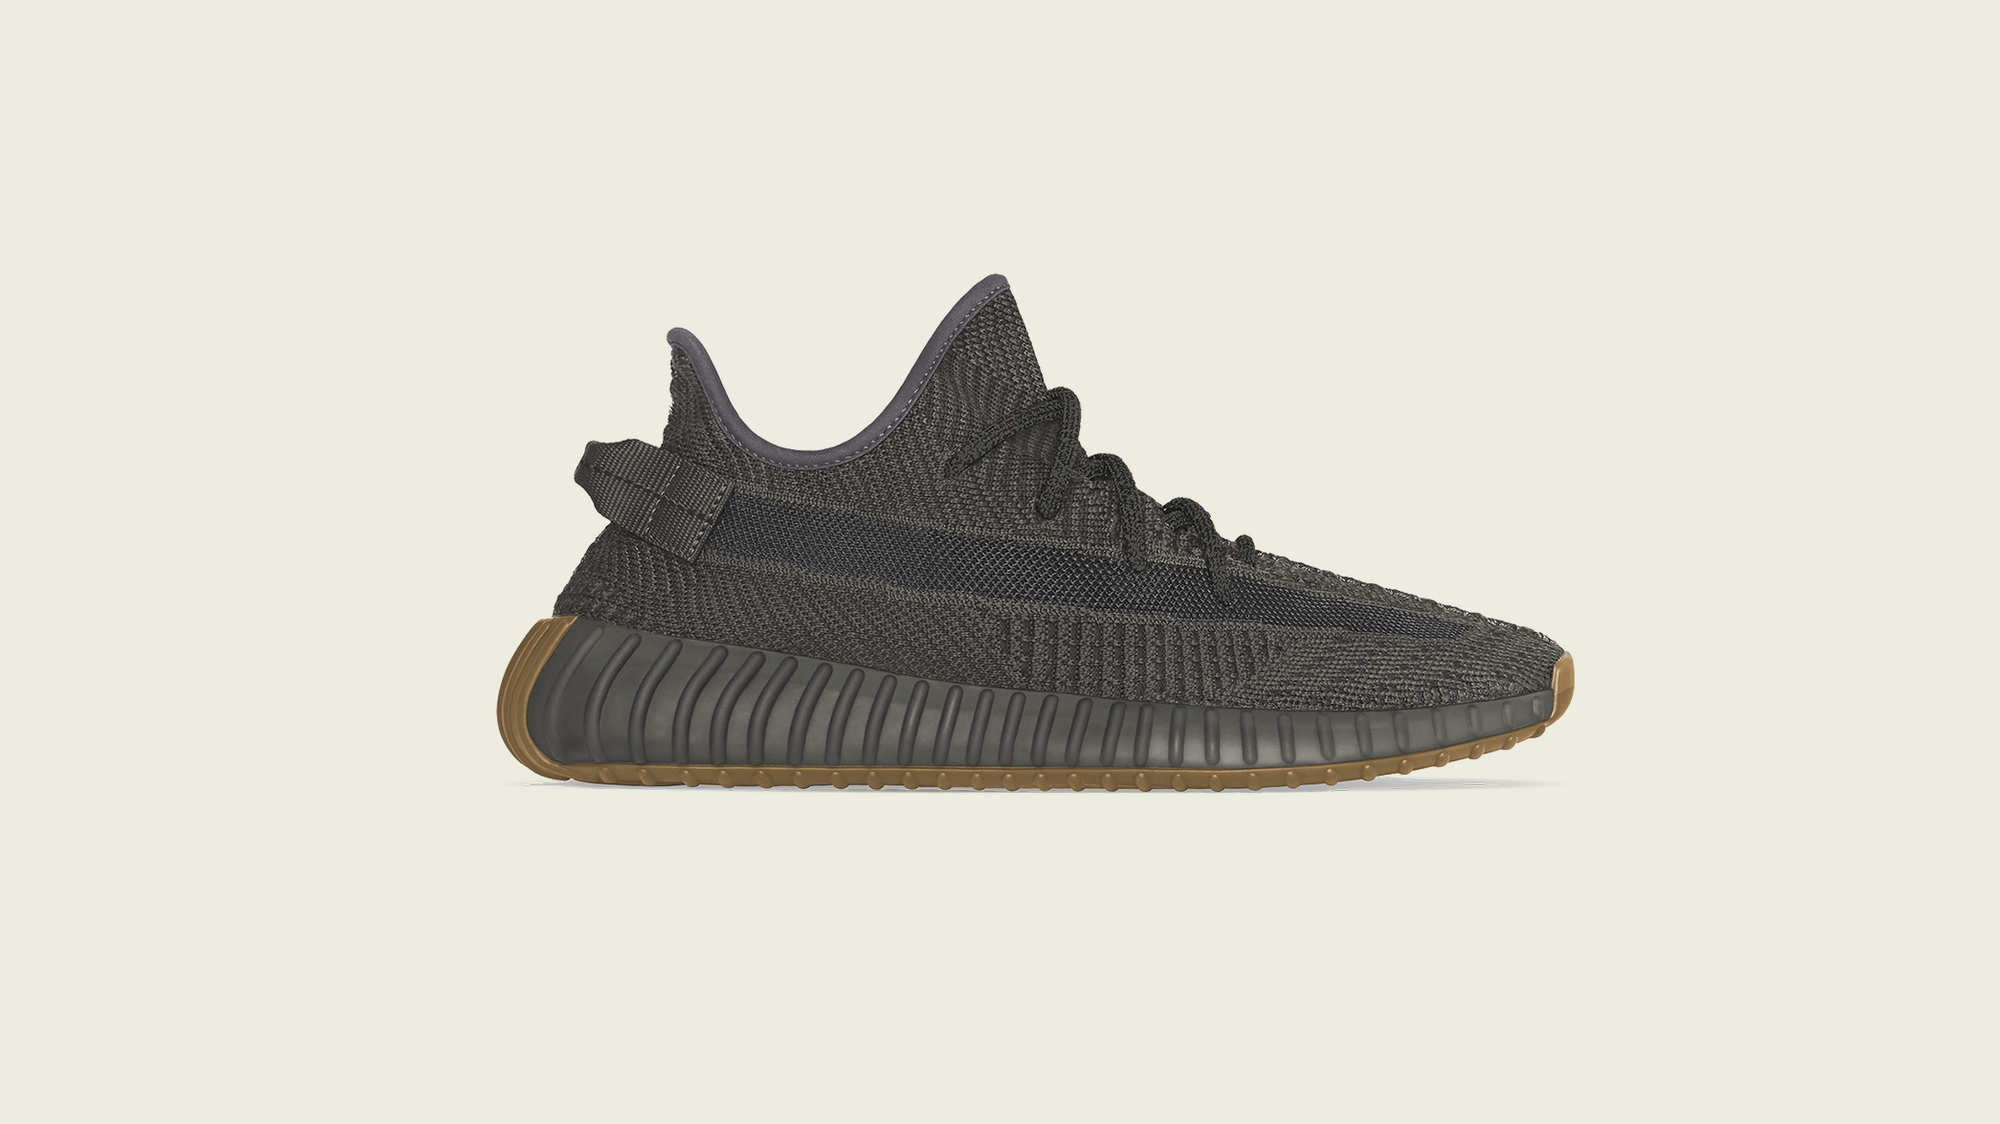 Adidas Yeezy Boost 350 V2 "Cinder" Has Been Unveiled | Sneaker Buzz